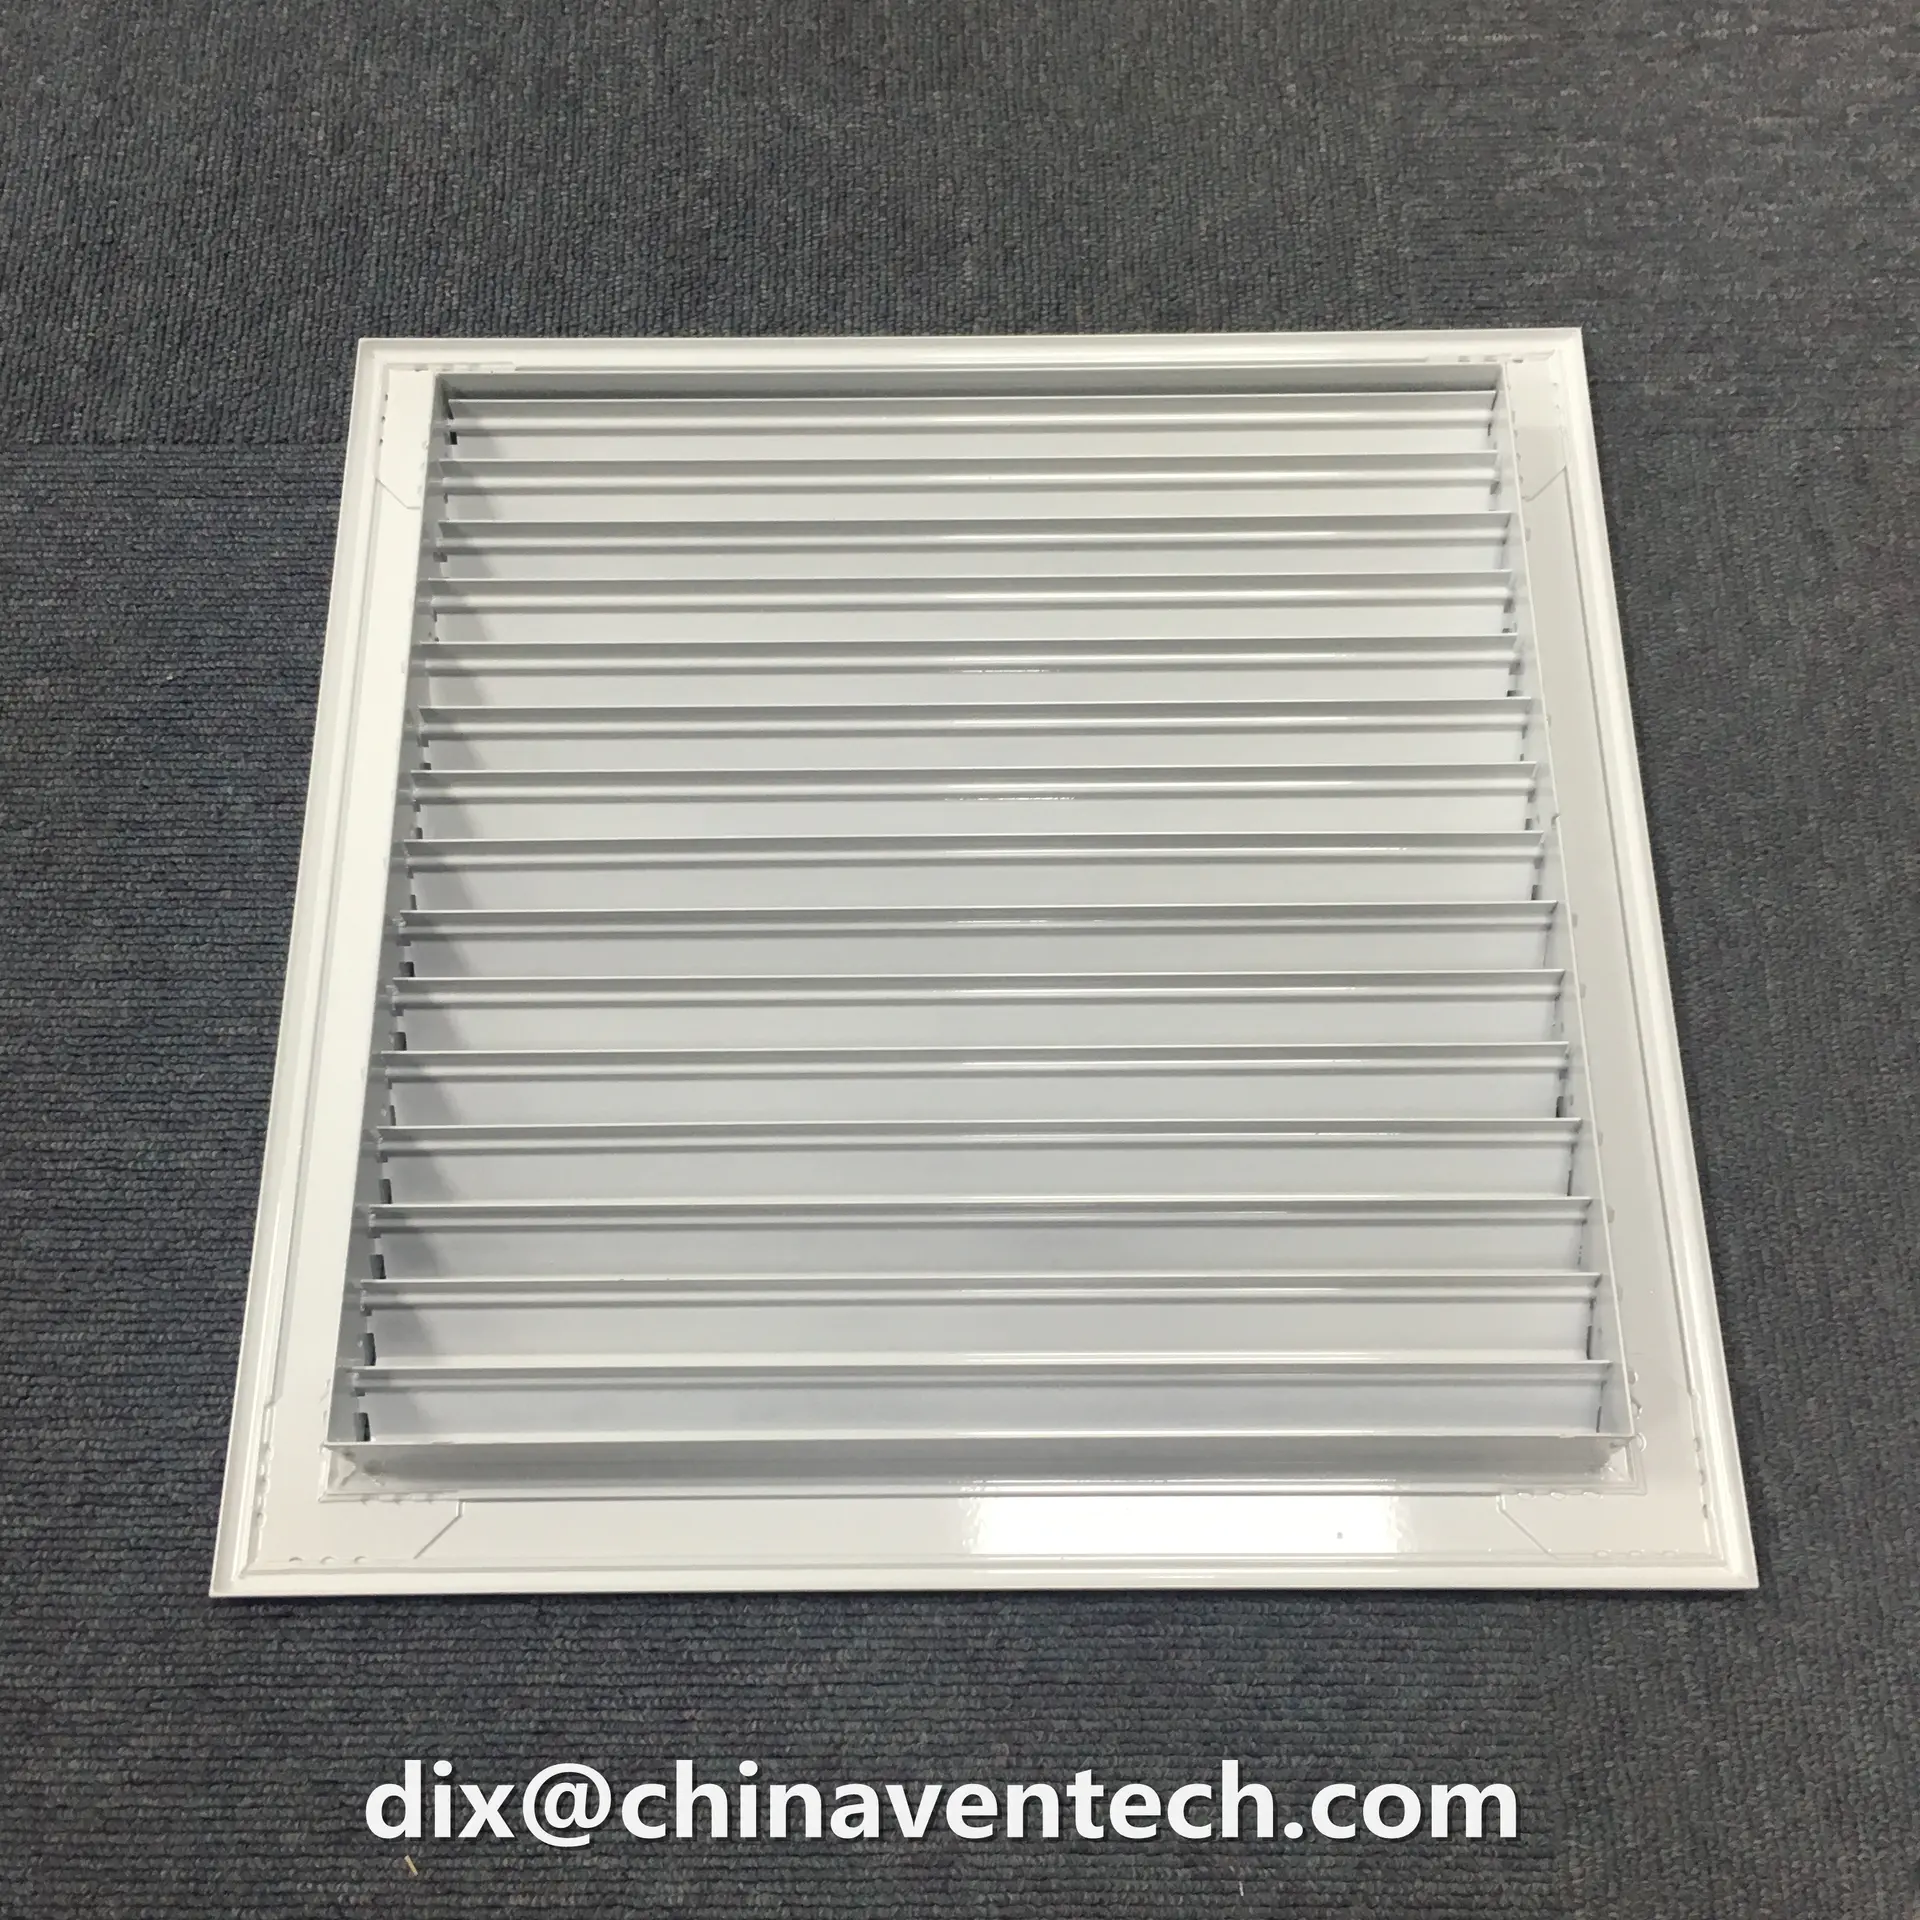 0 Degree Rectangale Vent Air Conditioning Return Grill